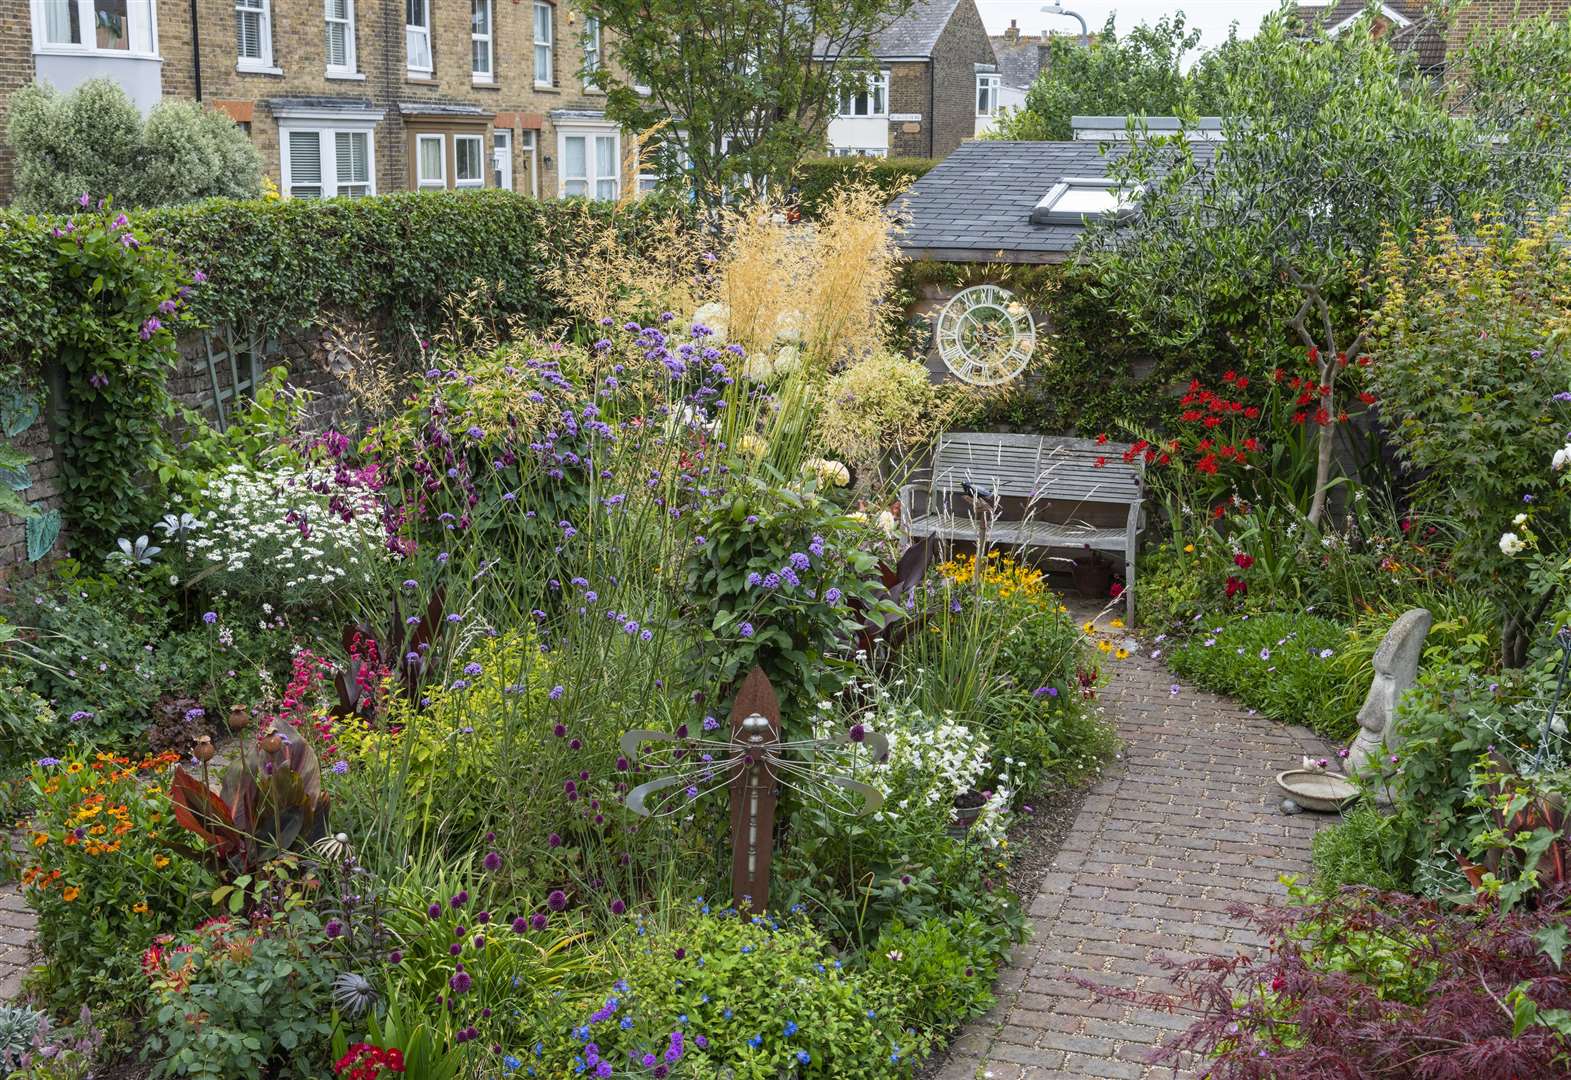 Deal Open Gardens raises £5,400 for charities backed by National